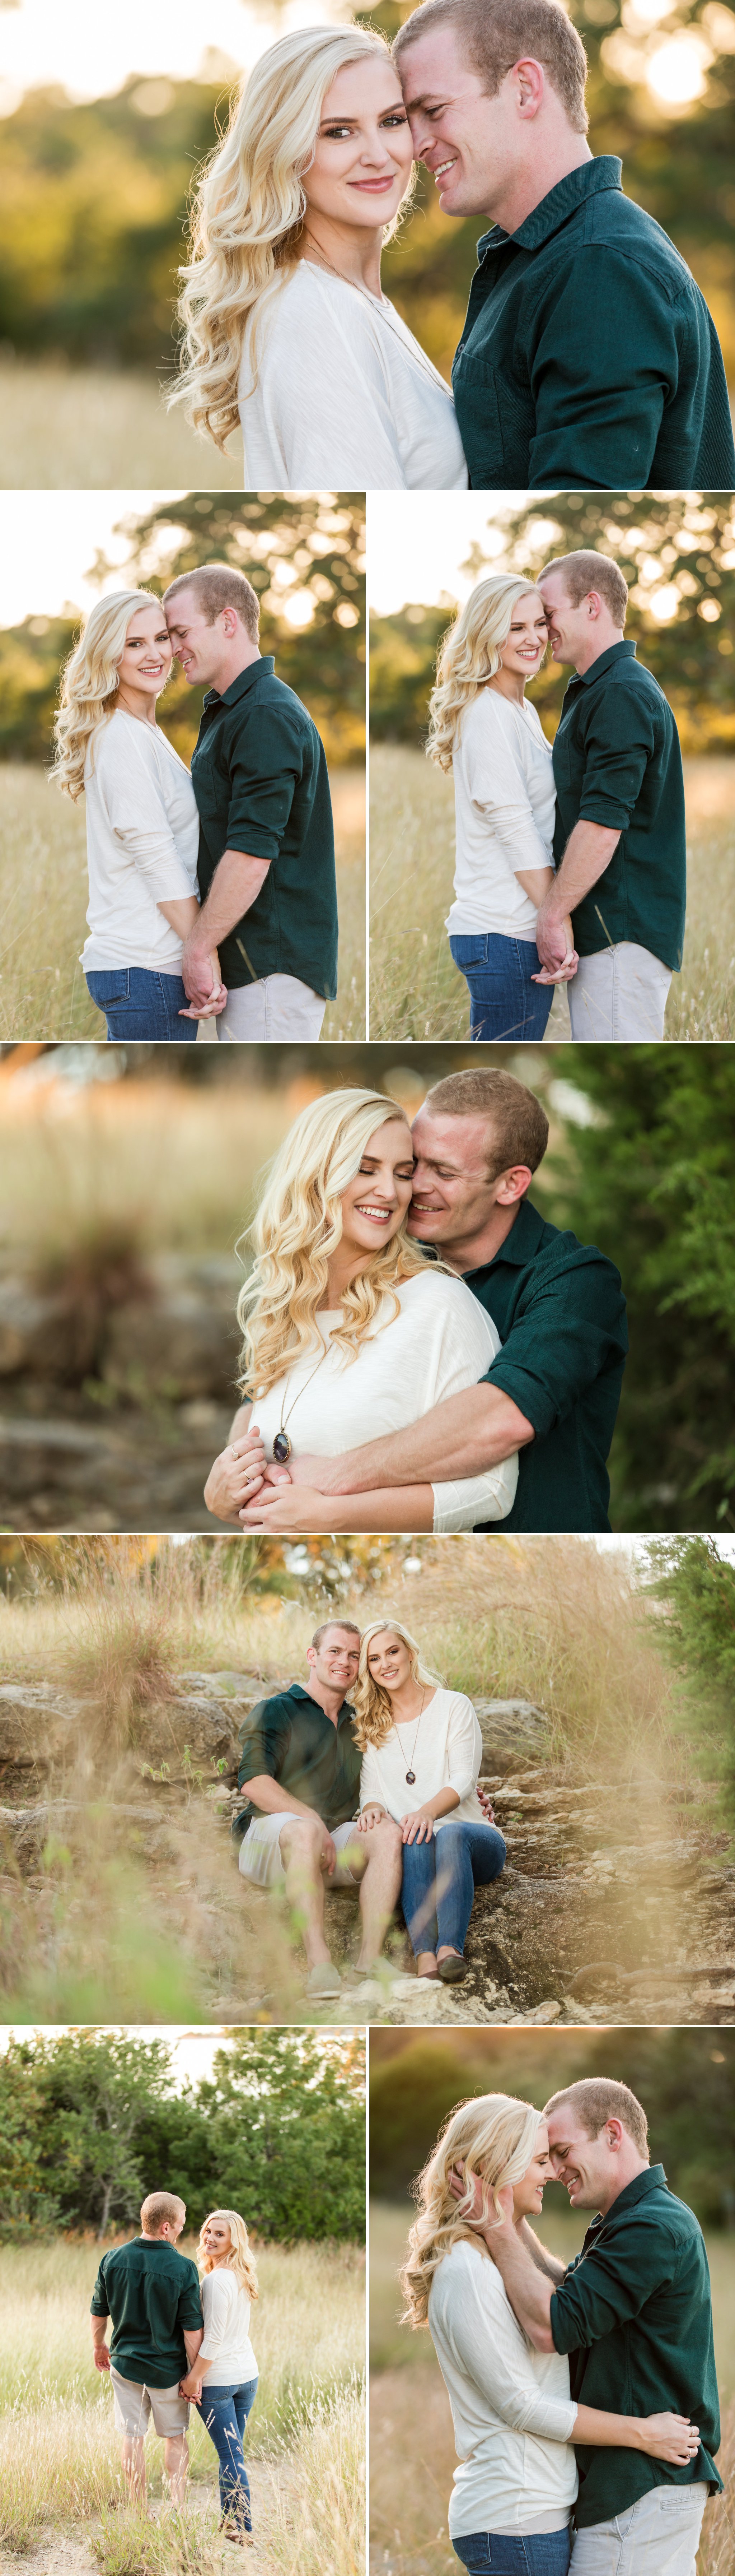 Engagement Session at Overlook Park in Canyon Lake Texas by Dawn Elizabeth Studios - San Antonio Wedding Photographer